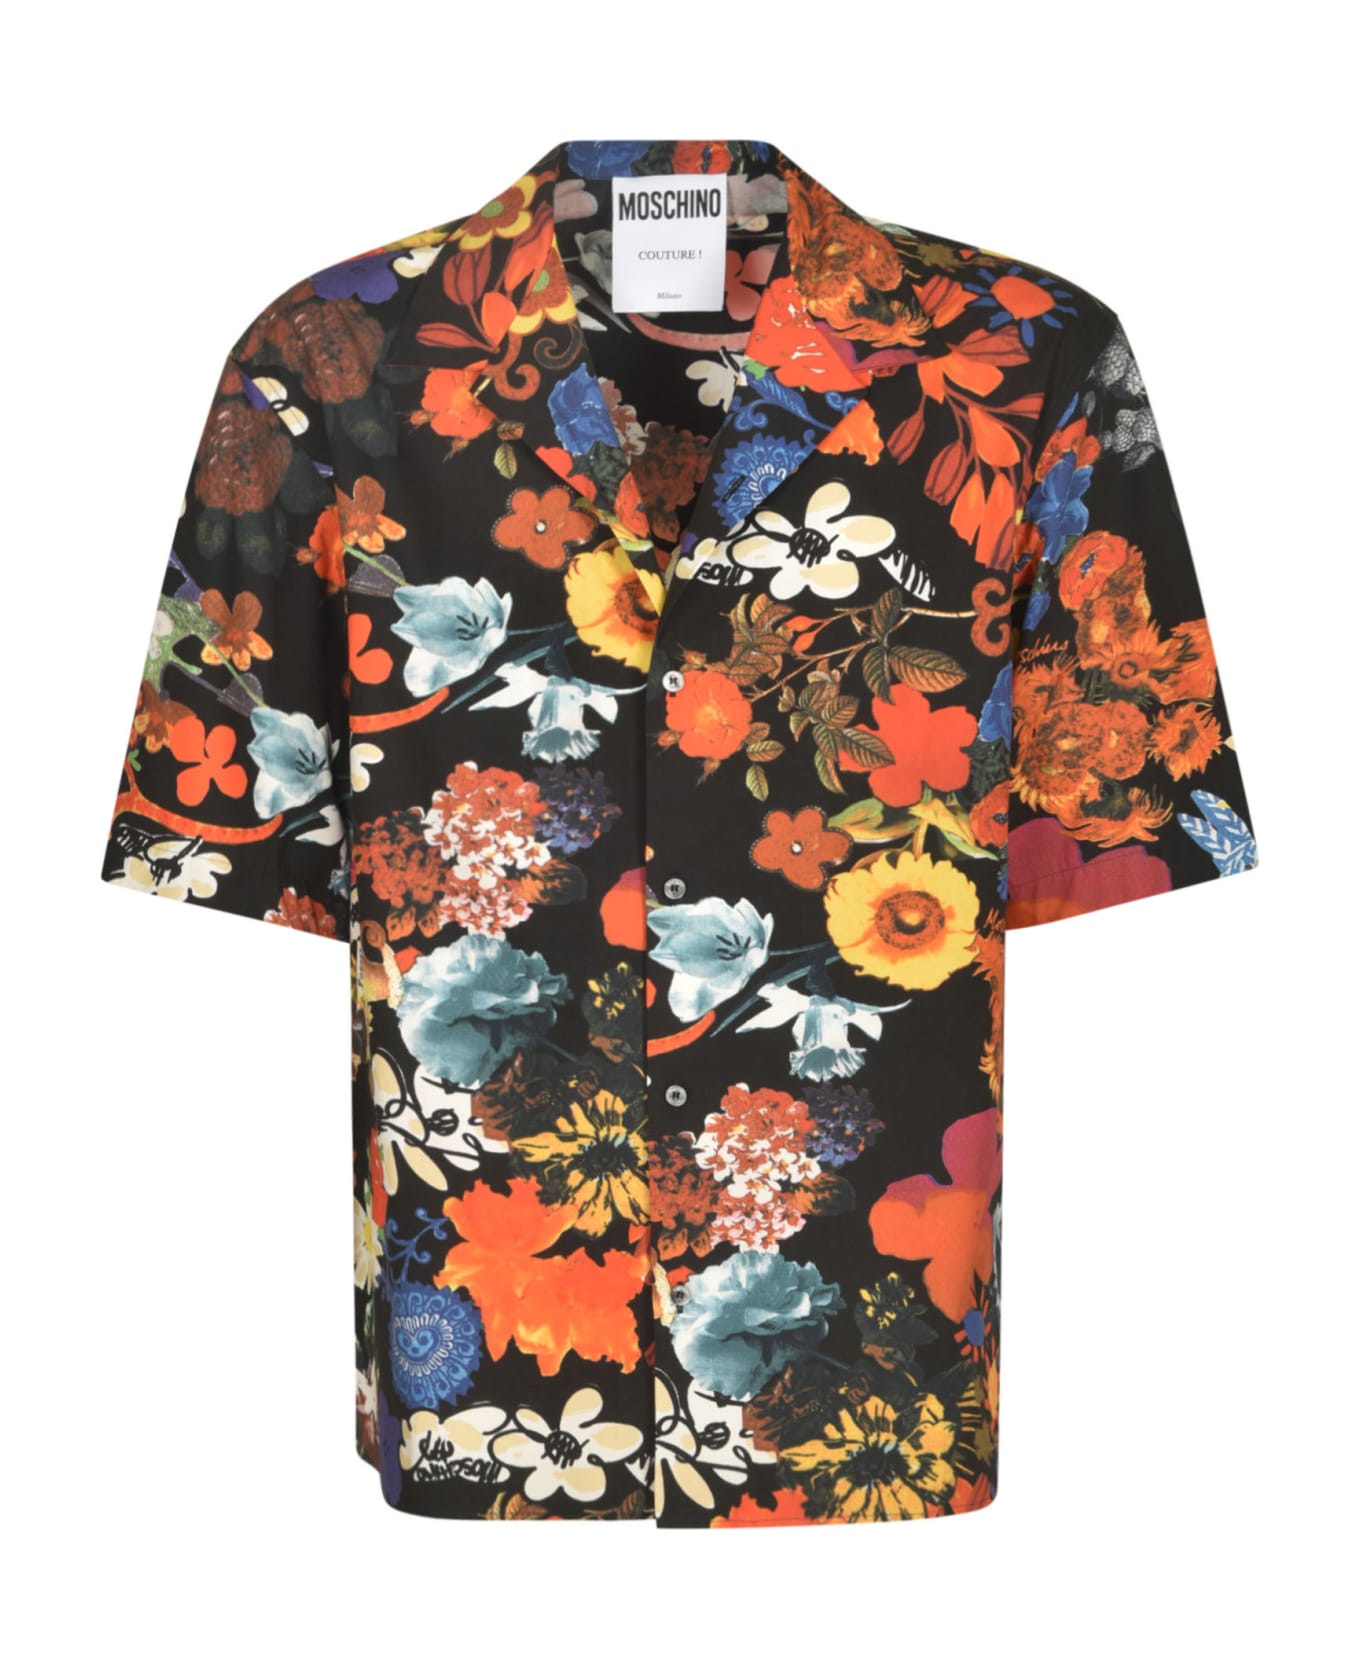 Moschino Floral Print Shirt - Multicolor シャツ